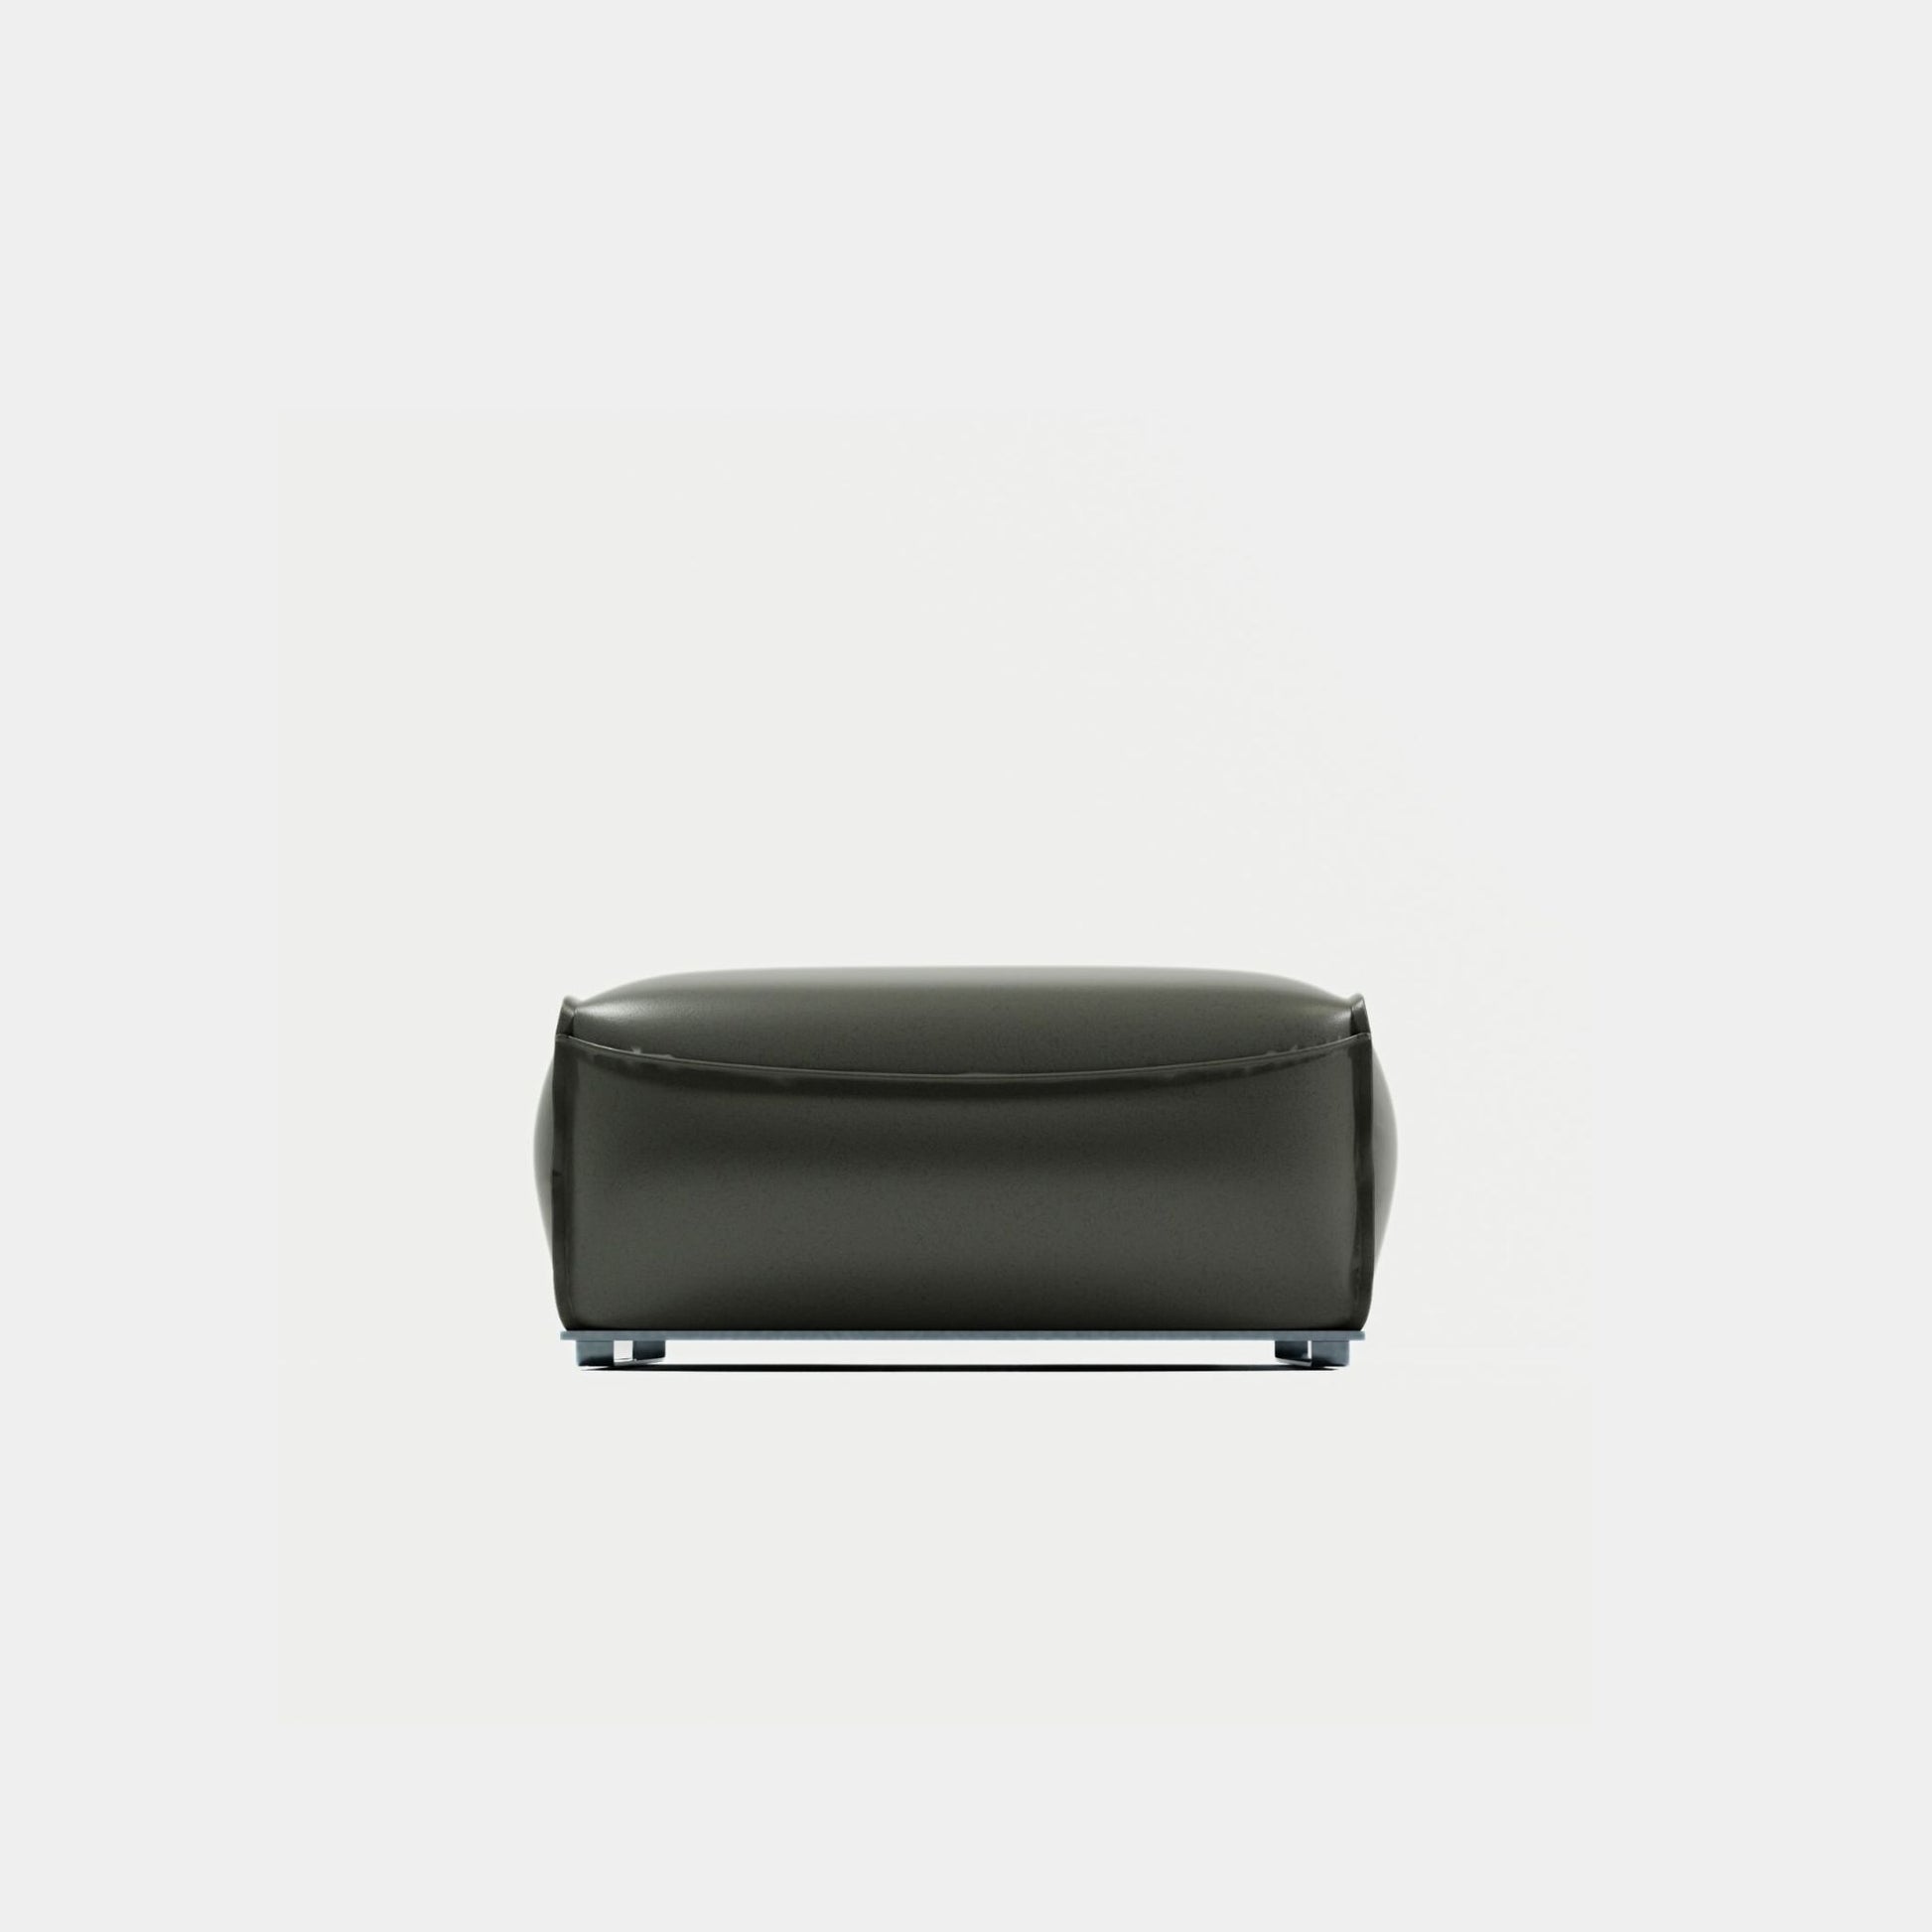 Colby leather ottoman dark green